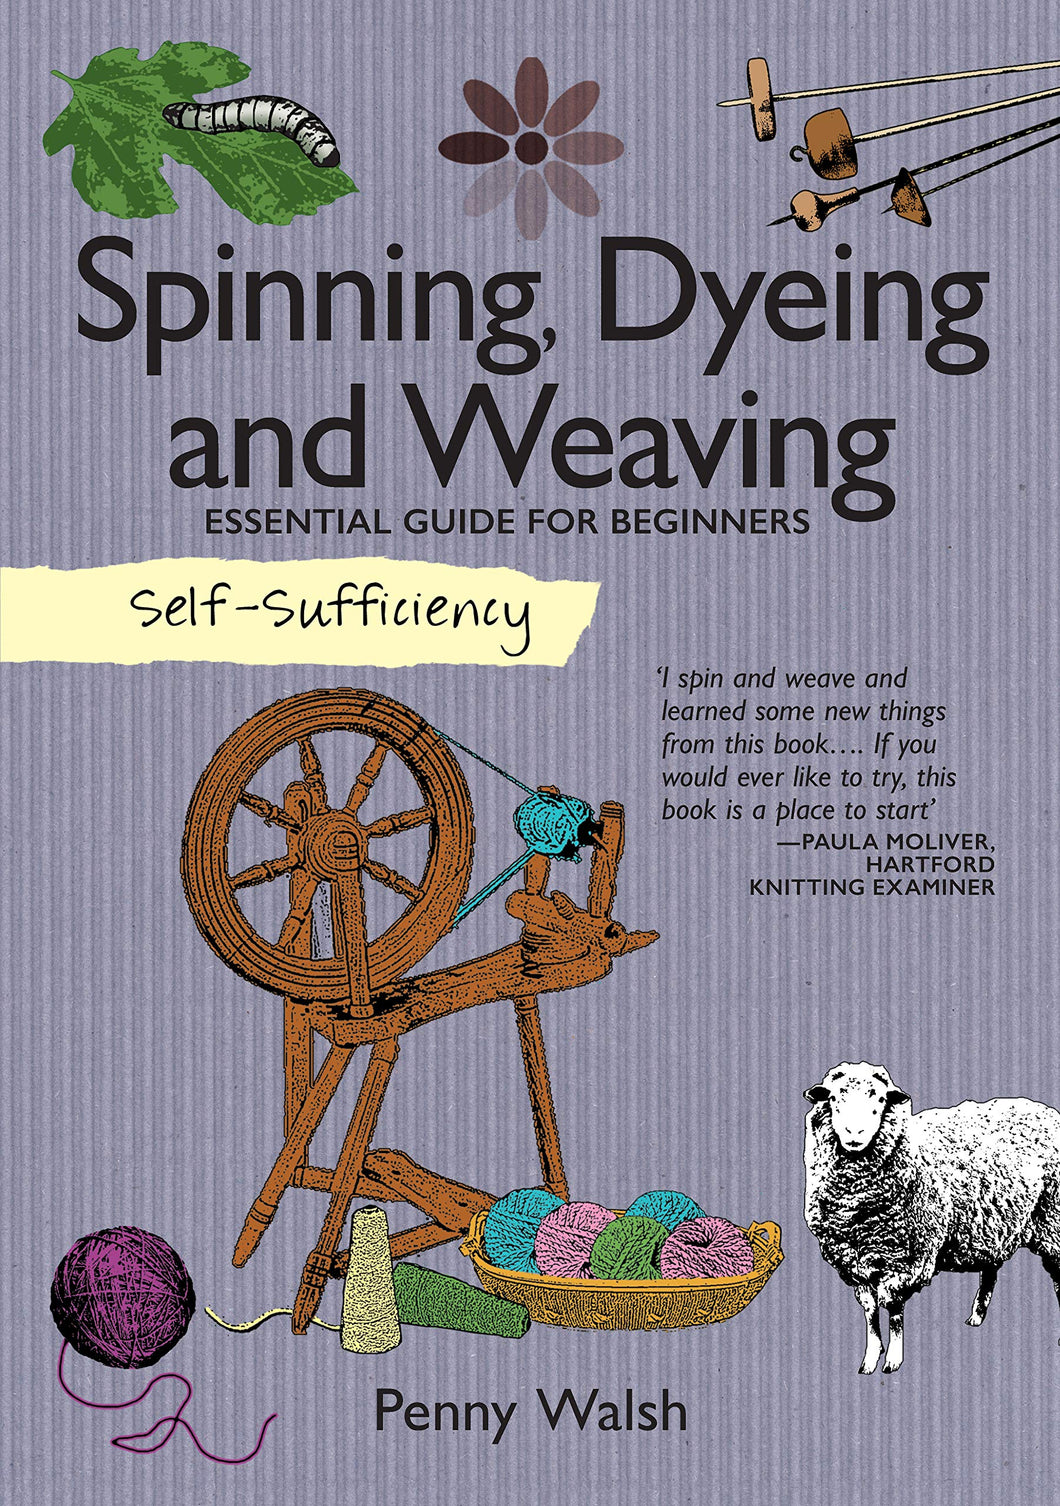 Self-Sufficiency: Spinning, Dying & Weaving